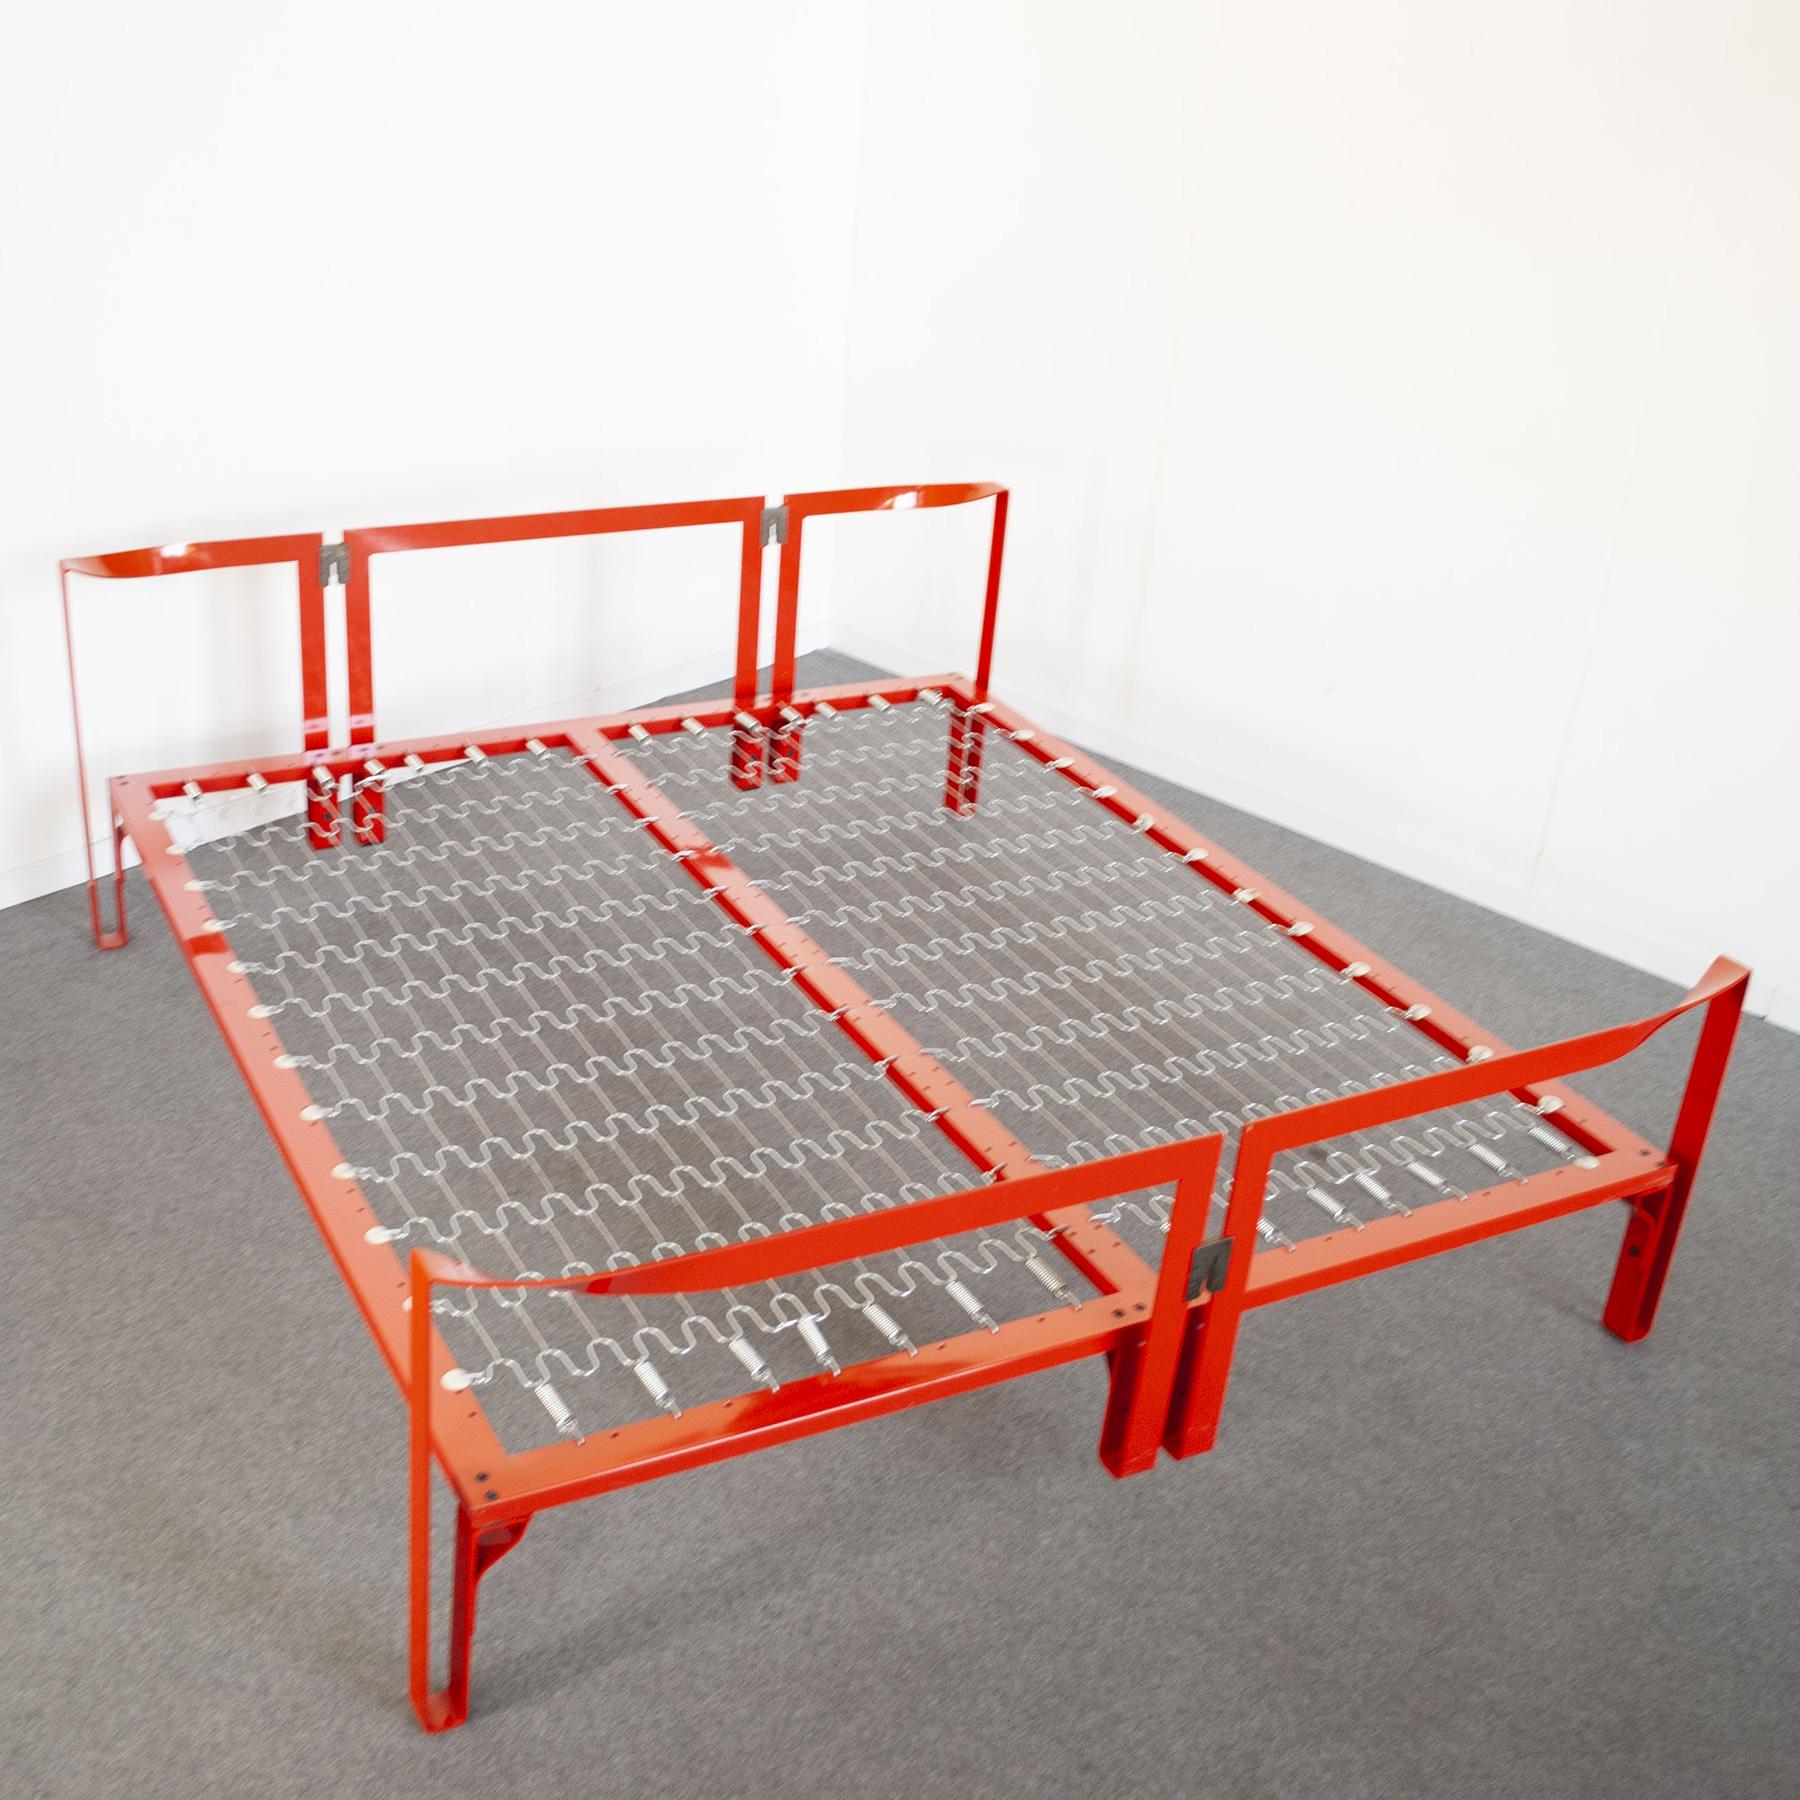 Afra Tobia Scarpa Italian Midcentury Bed from the Seventies 2